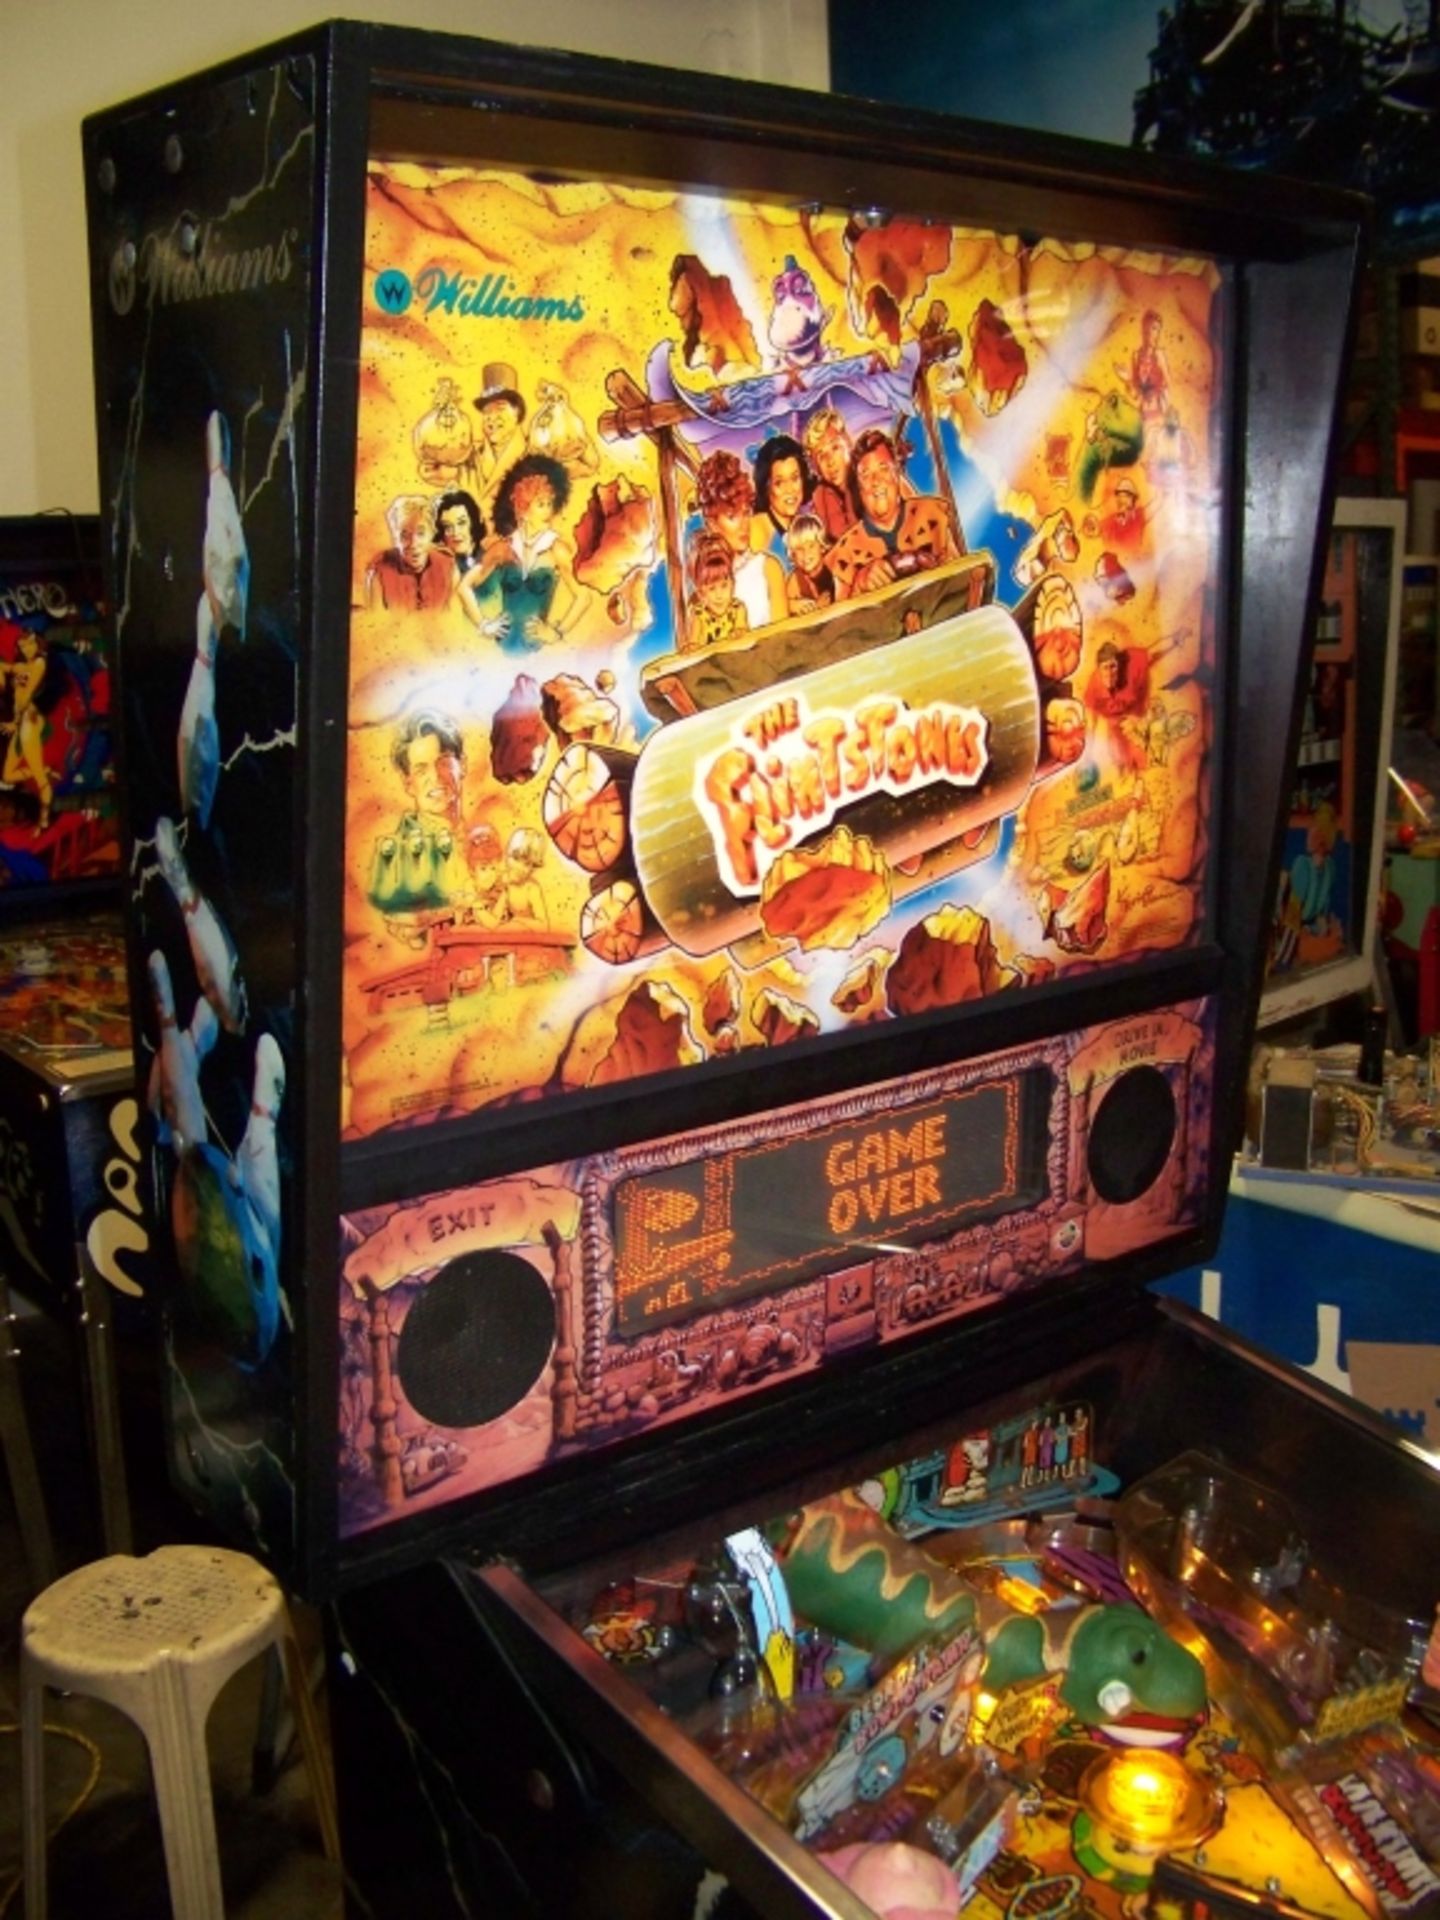 FLINSTONES THE MOVIE PINBALL MACHINE WILLIAMS 1994 Item is in used condition. Evidence of wear and - Image 8 of 11